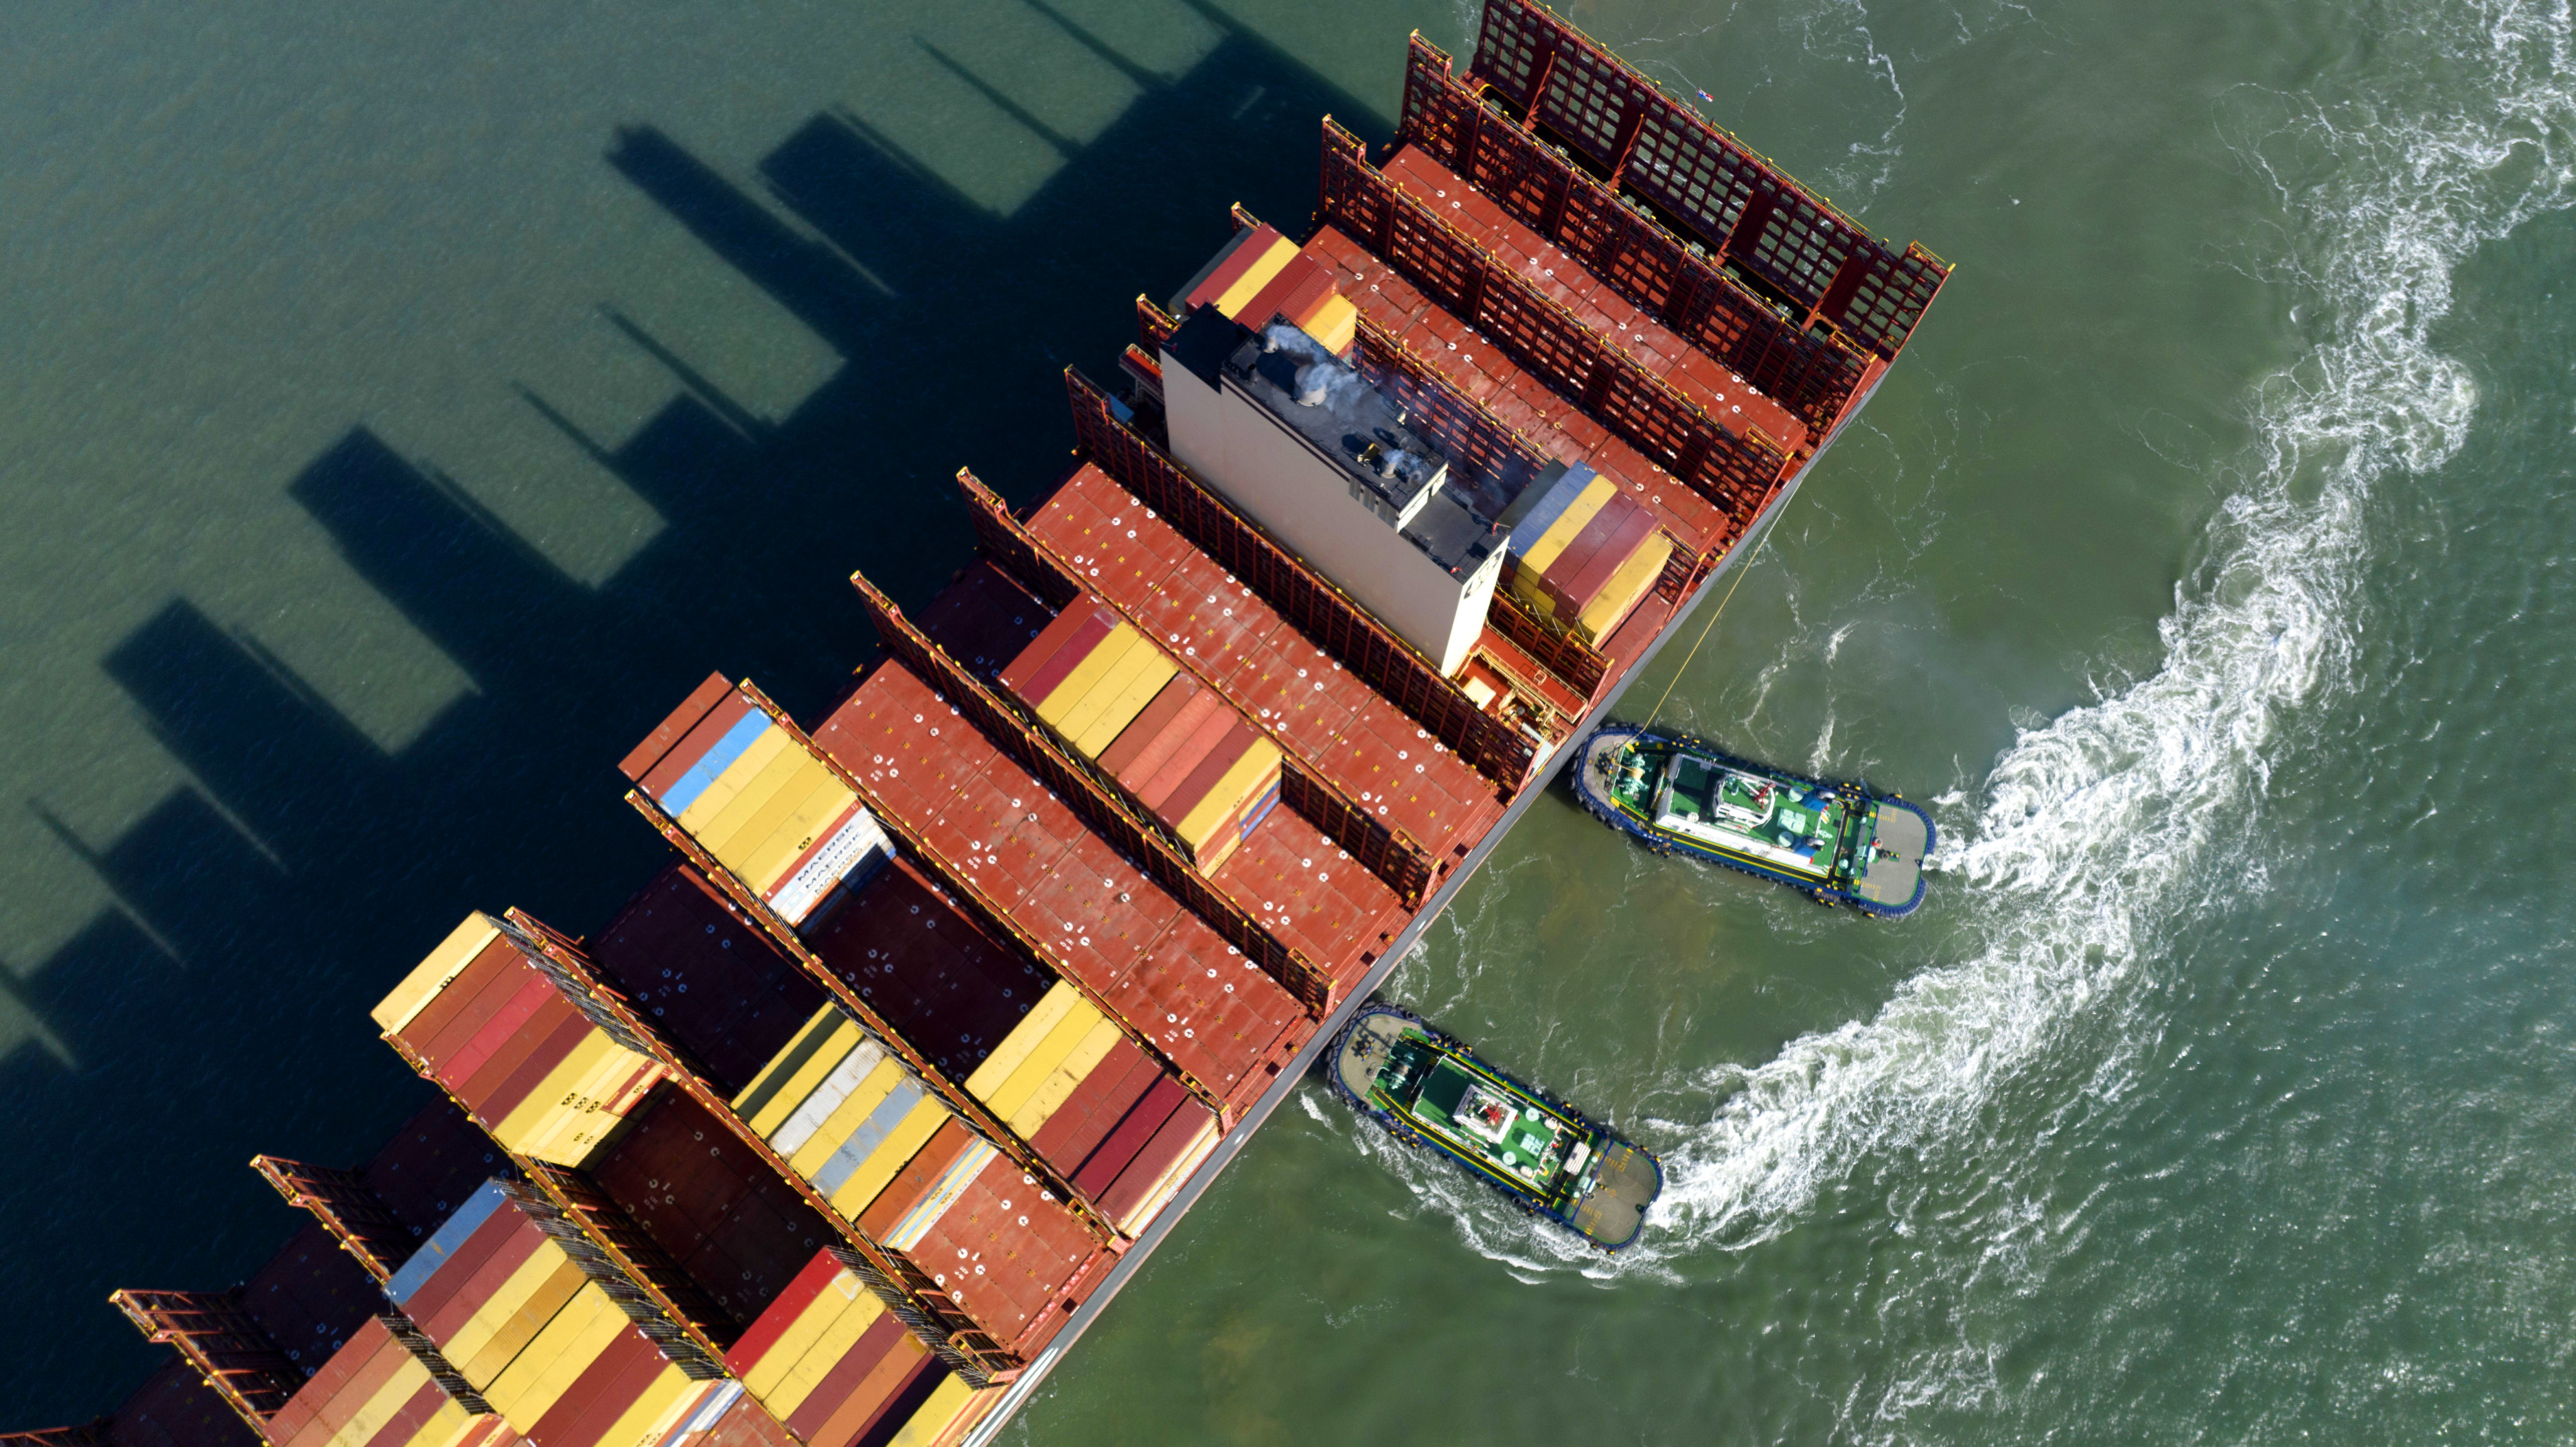 China is seeing shipping containers pile up as it reopens and the industry expects more exports. Photo: Xinhua